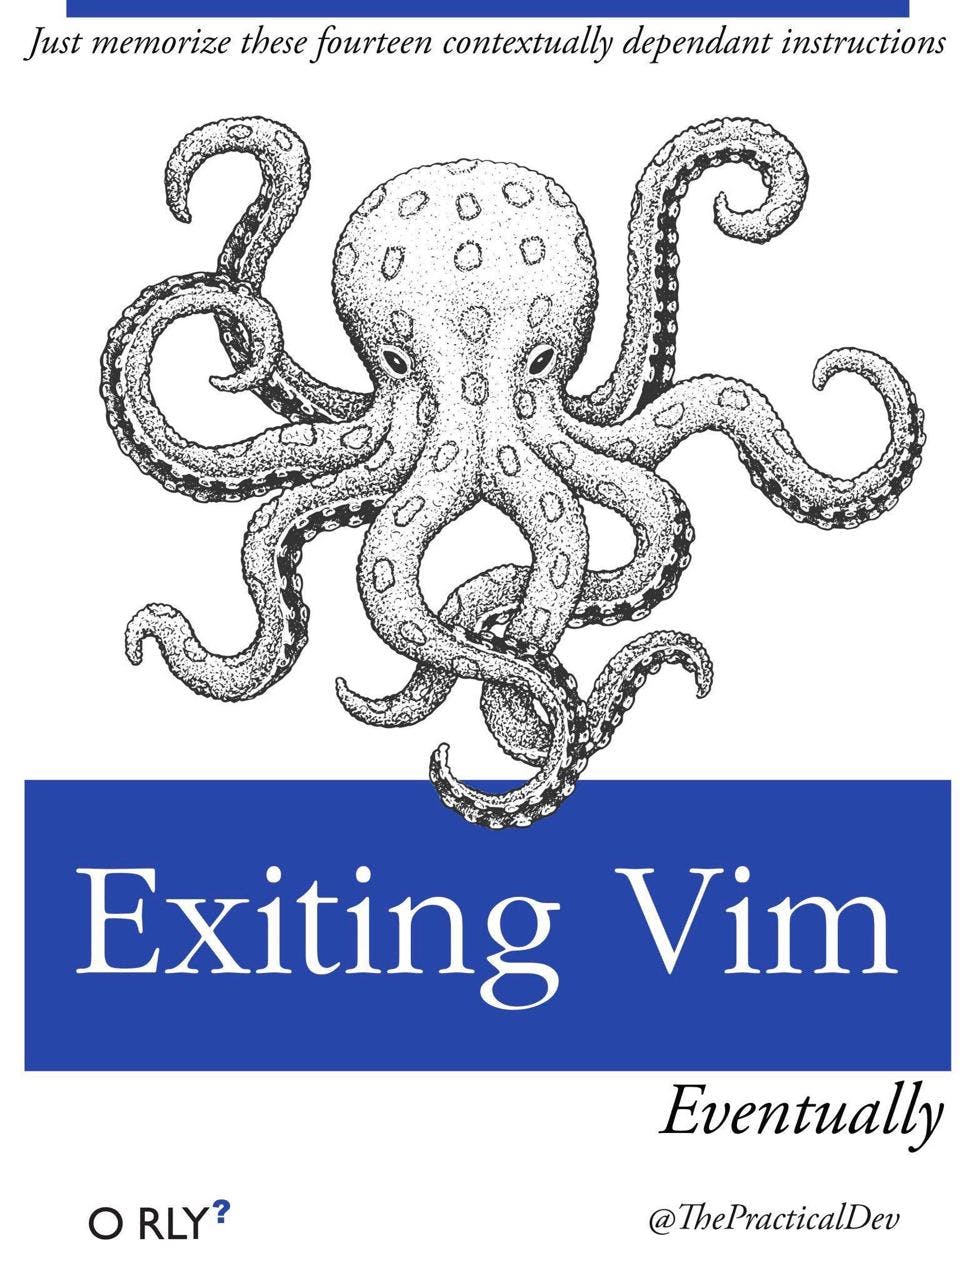 Exiting Vim | Just memorize these fourteen contextually dependent instructions